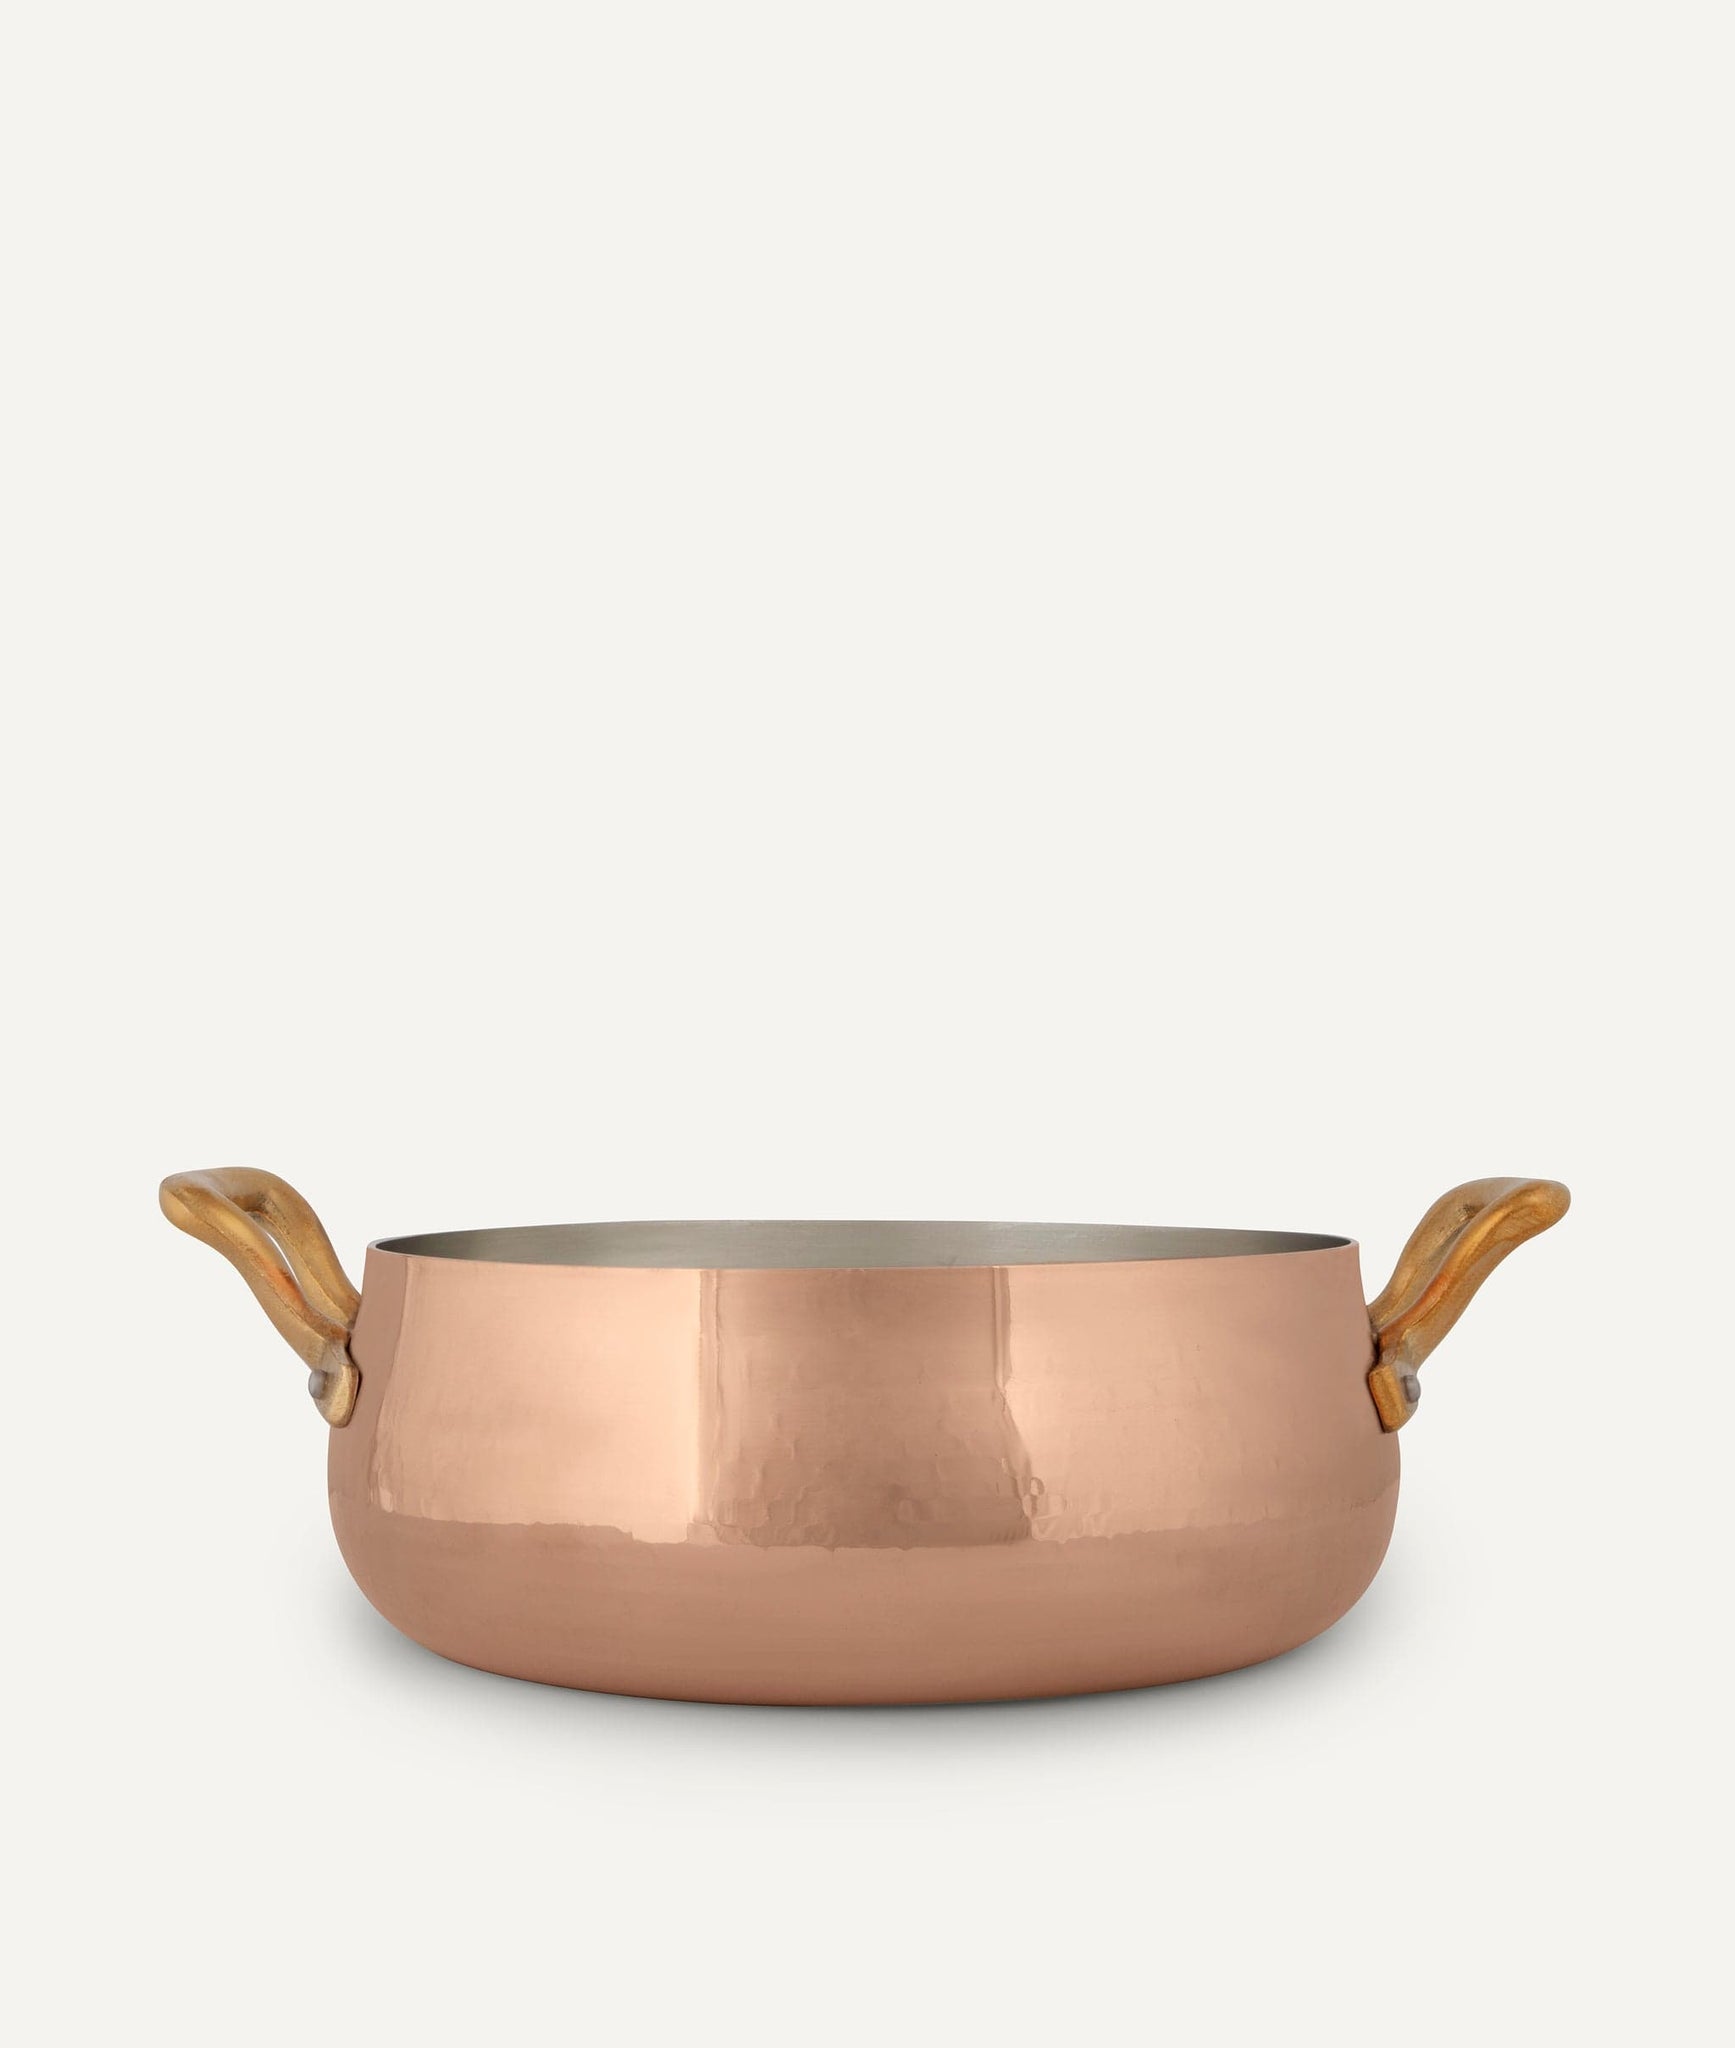 Curved saucepot in tinned copper